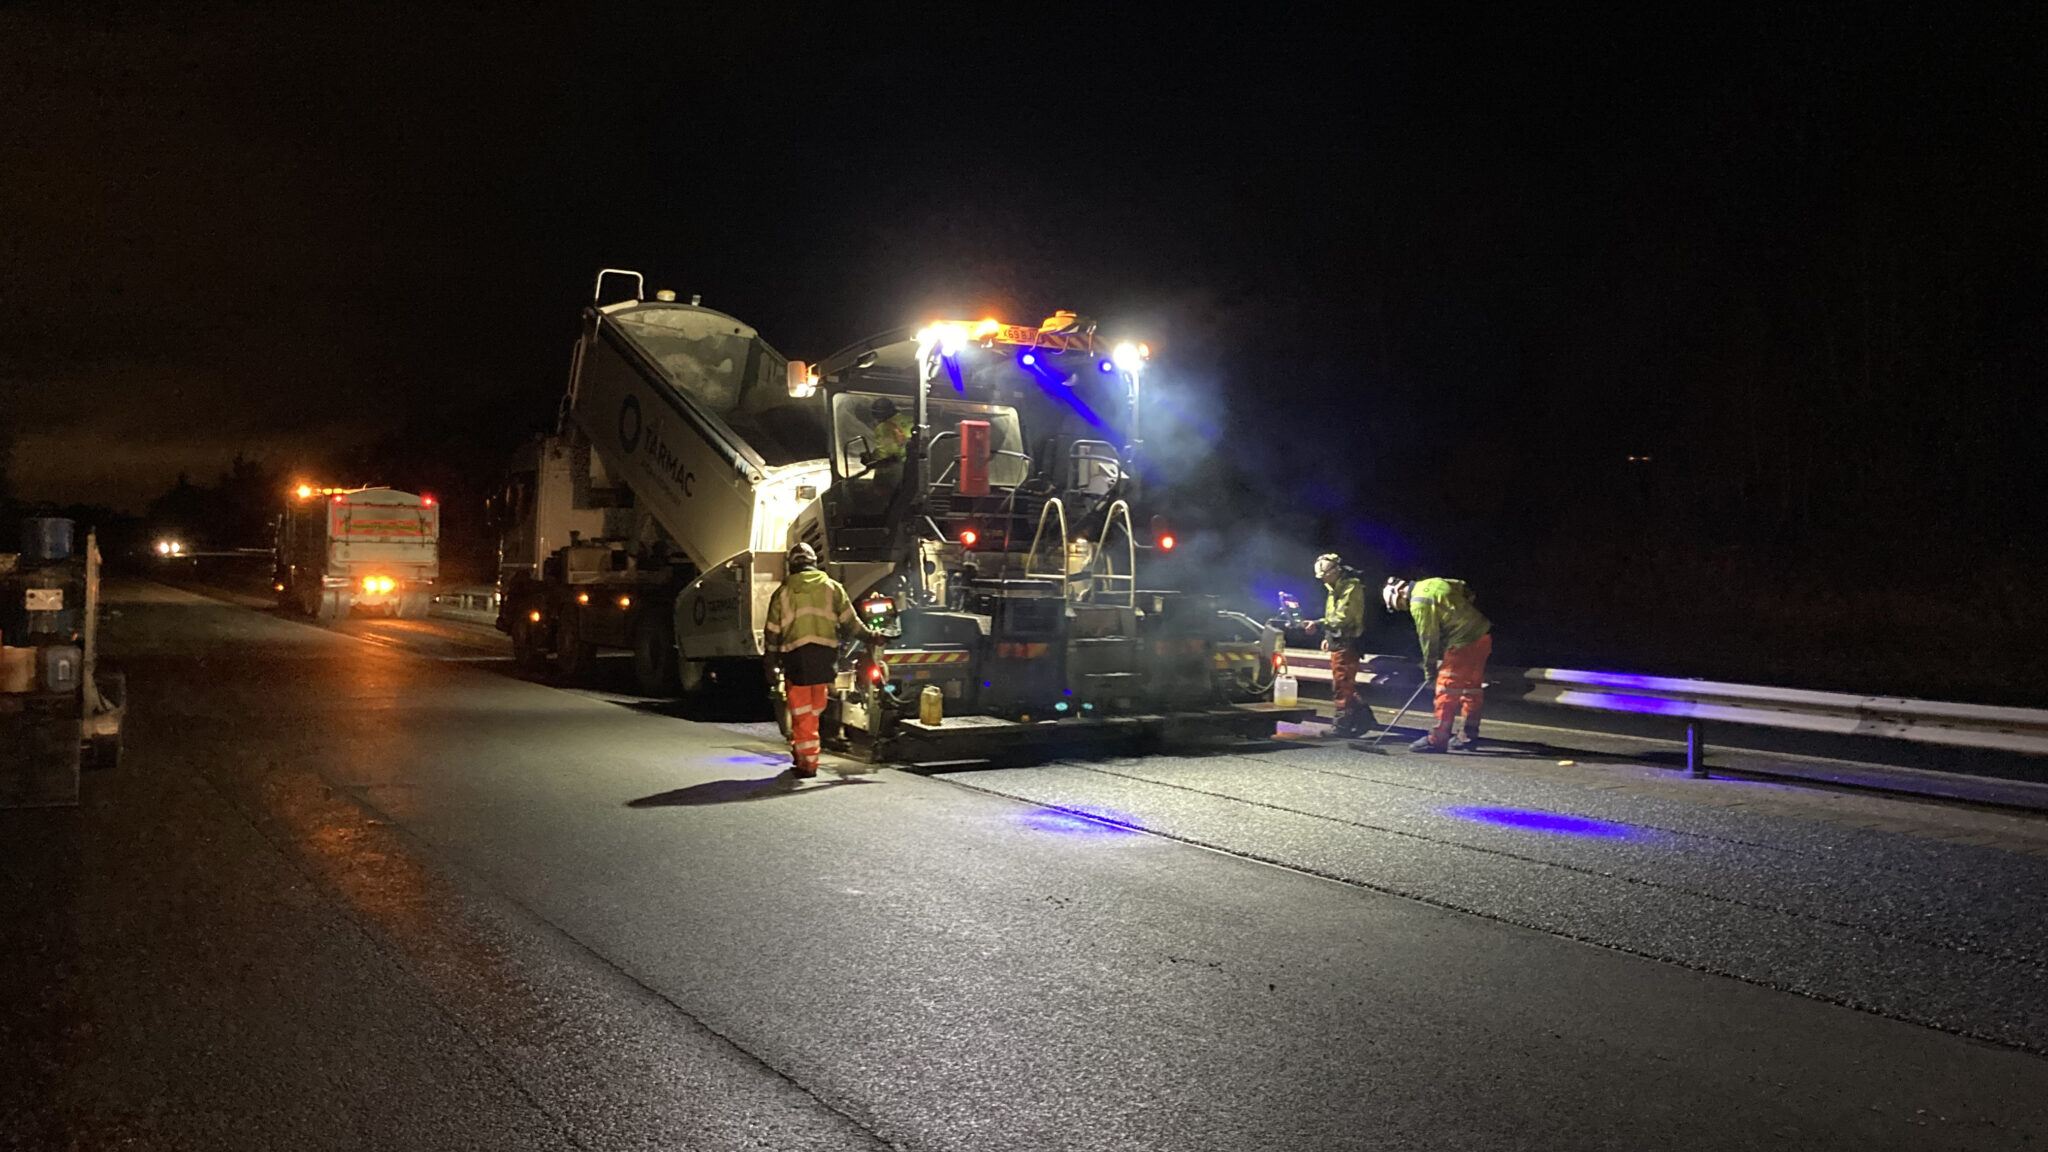 RESURFACING ON THE M9 JUNCTION 9 SOUTHBOUND